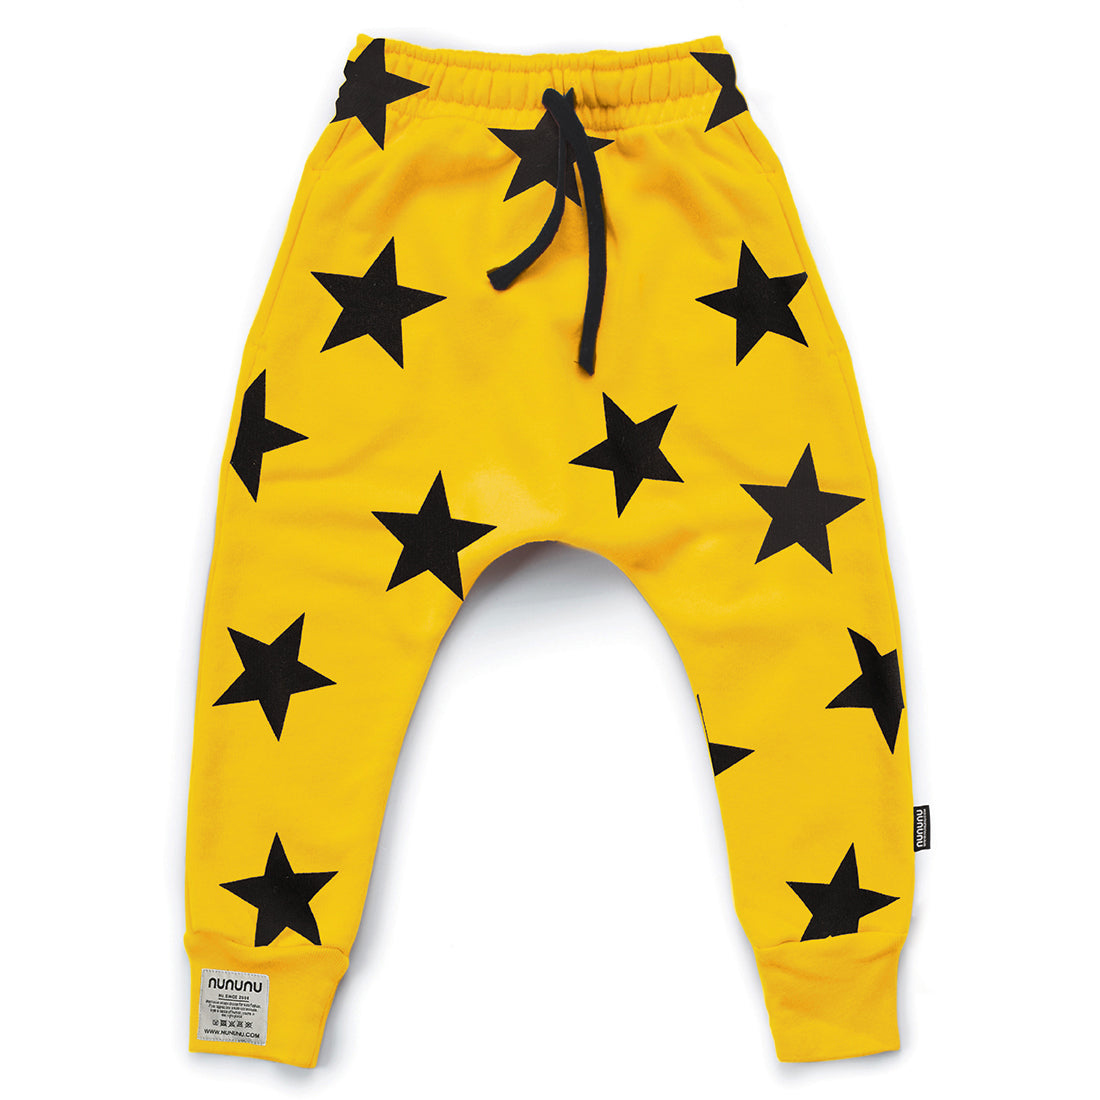 Boys & Girls Yellow Star Printed Cotton Trousers